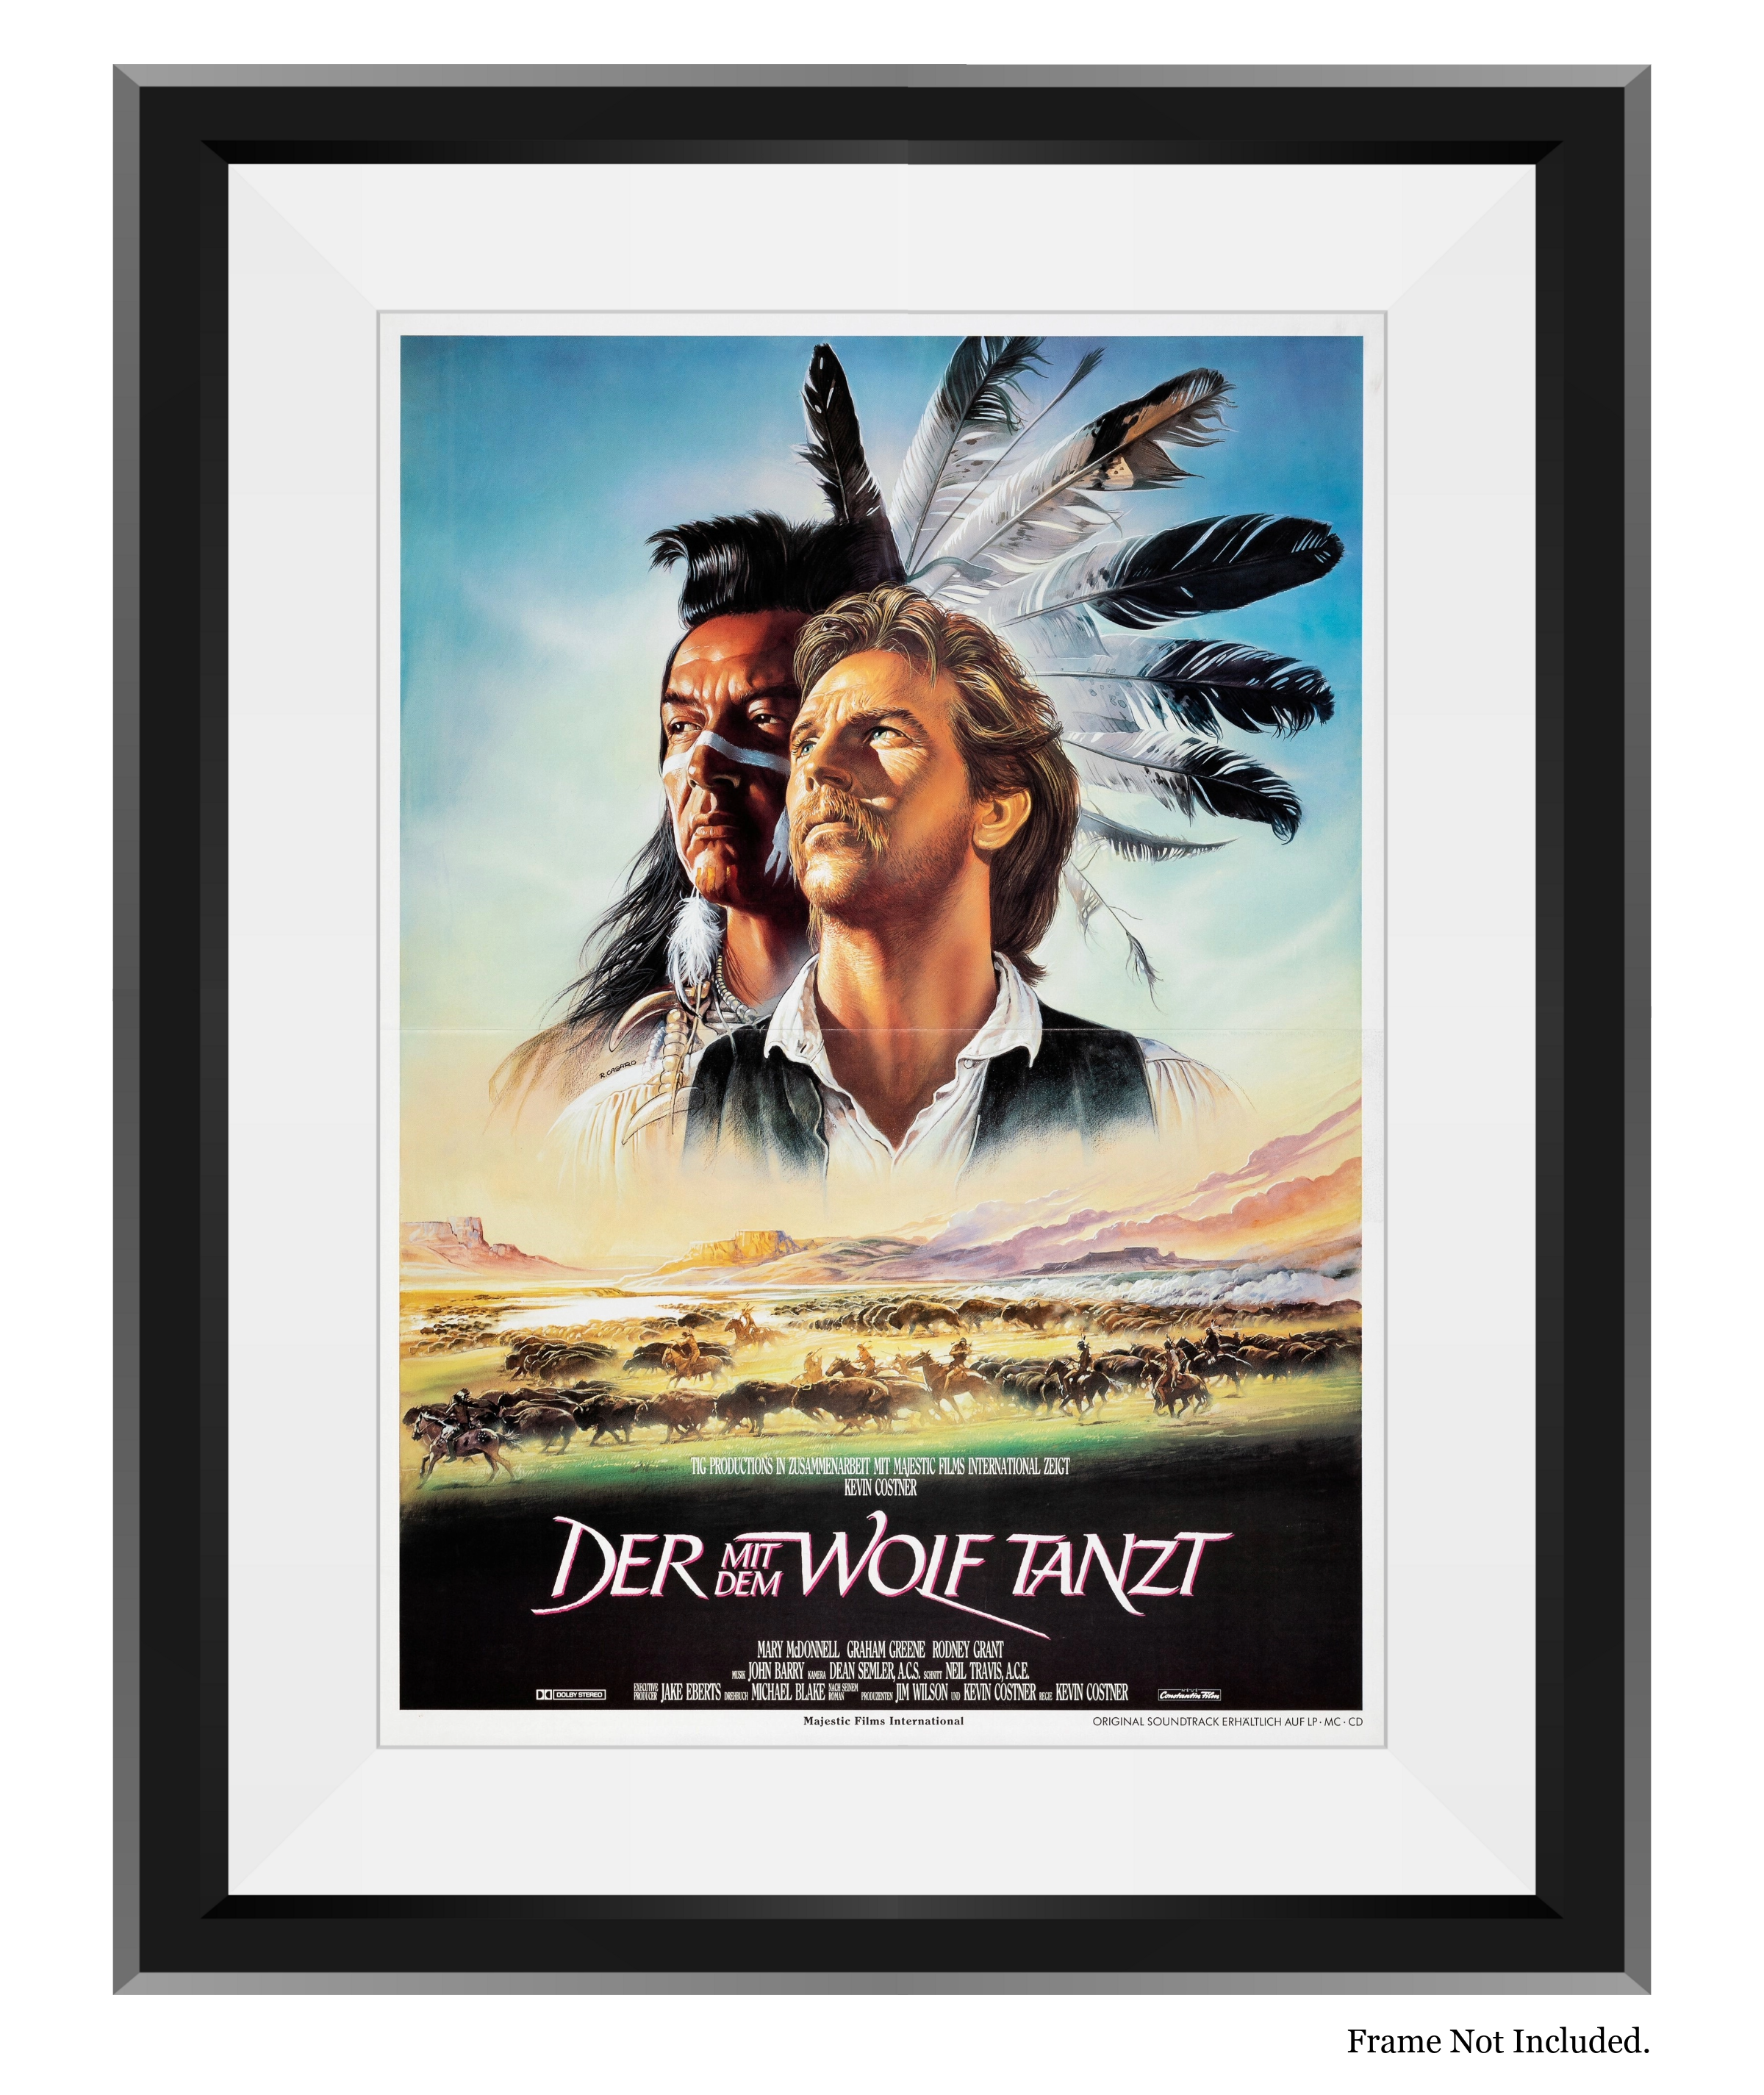 DANCES WITH WOLVES (1990)